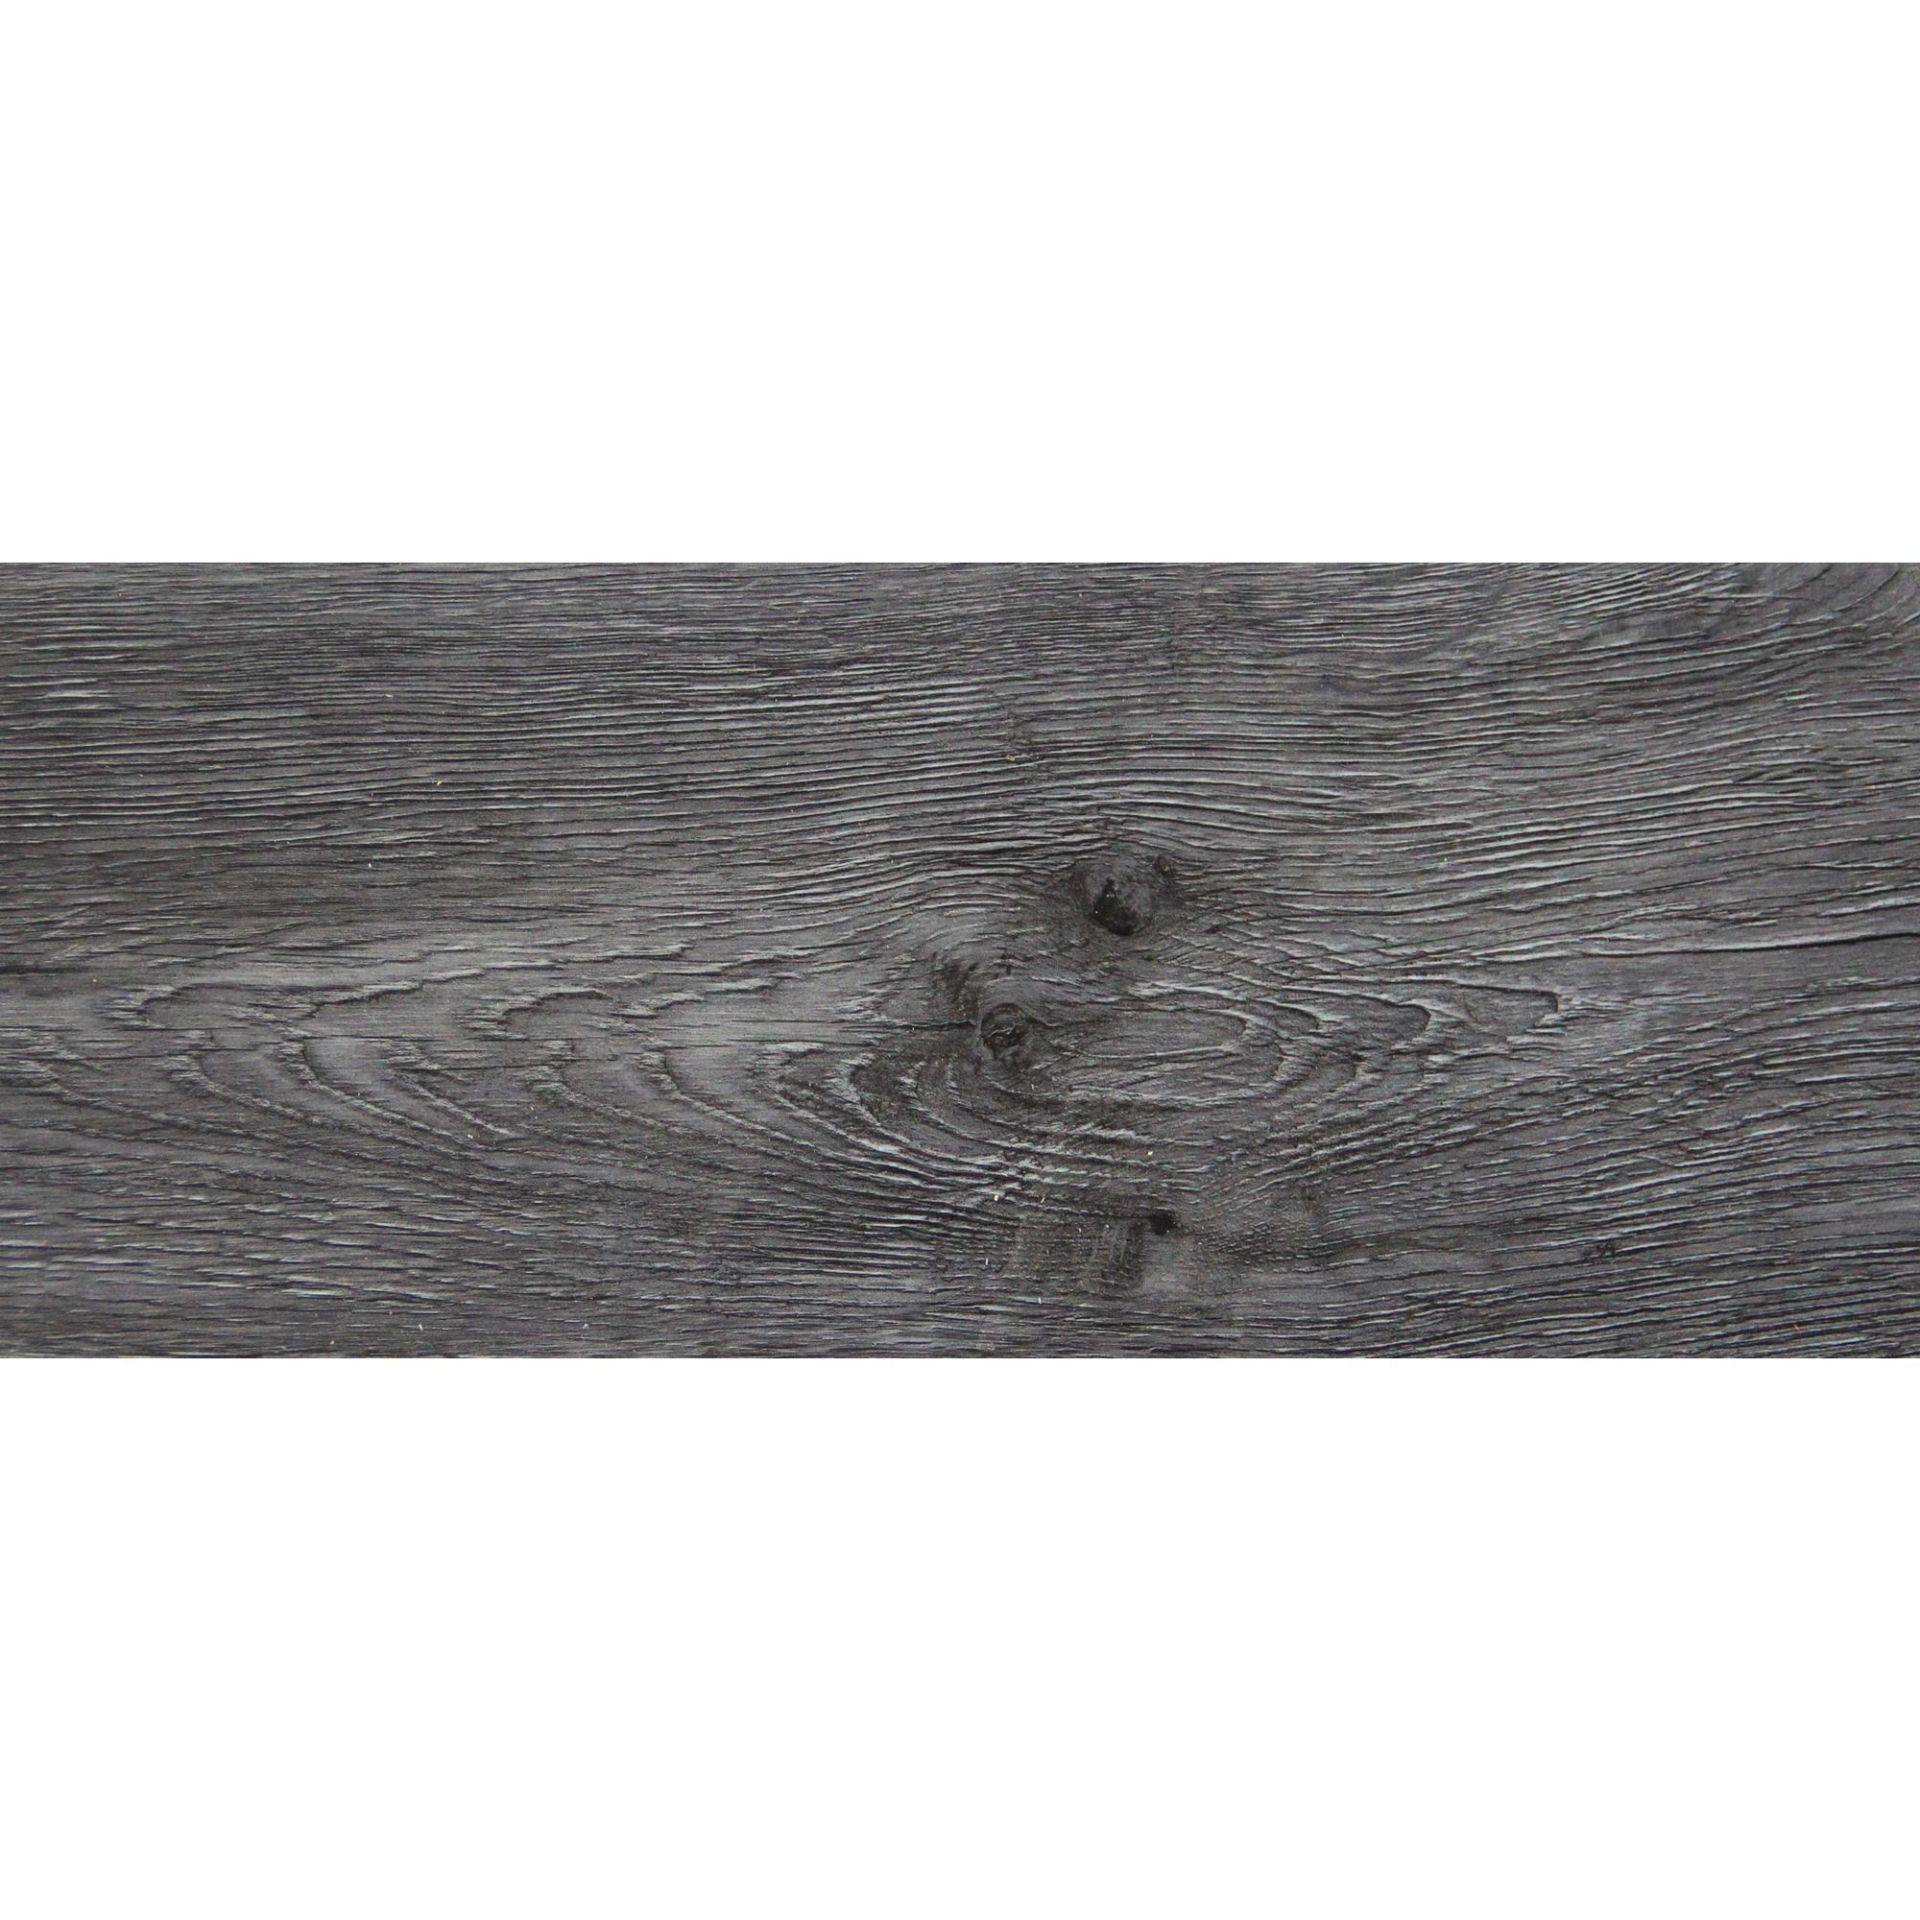 5.6m2 Luxury Grey Charcoal effect vinyl click flooring. Water resistant Fitting type - Easy c... - Image 2 of 2